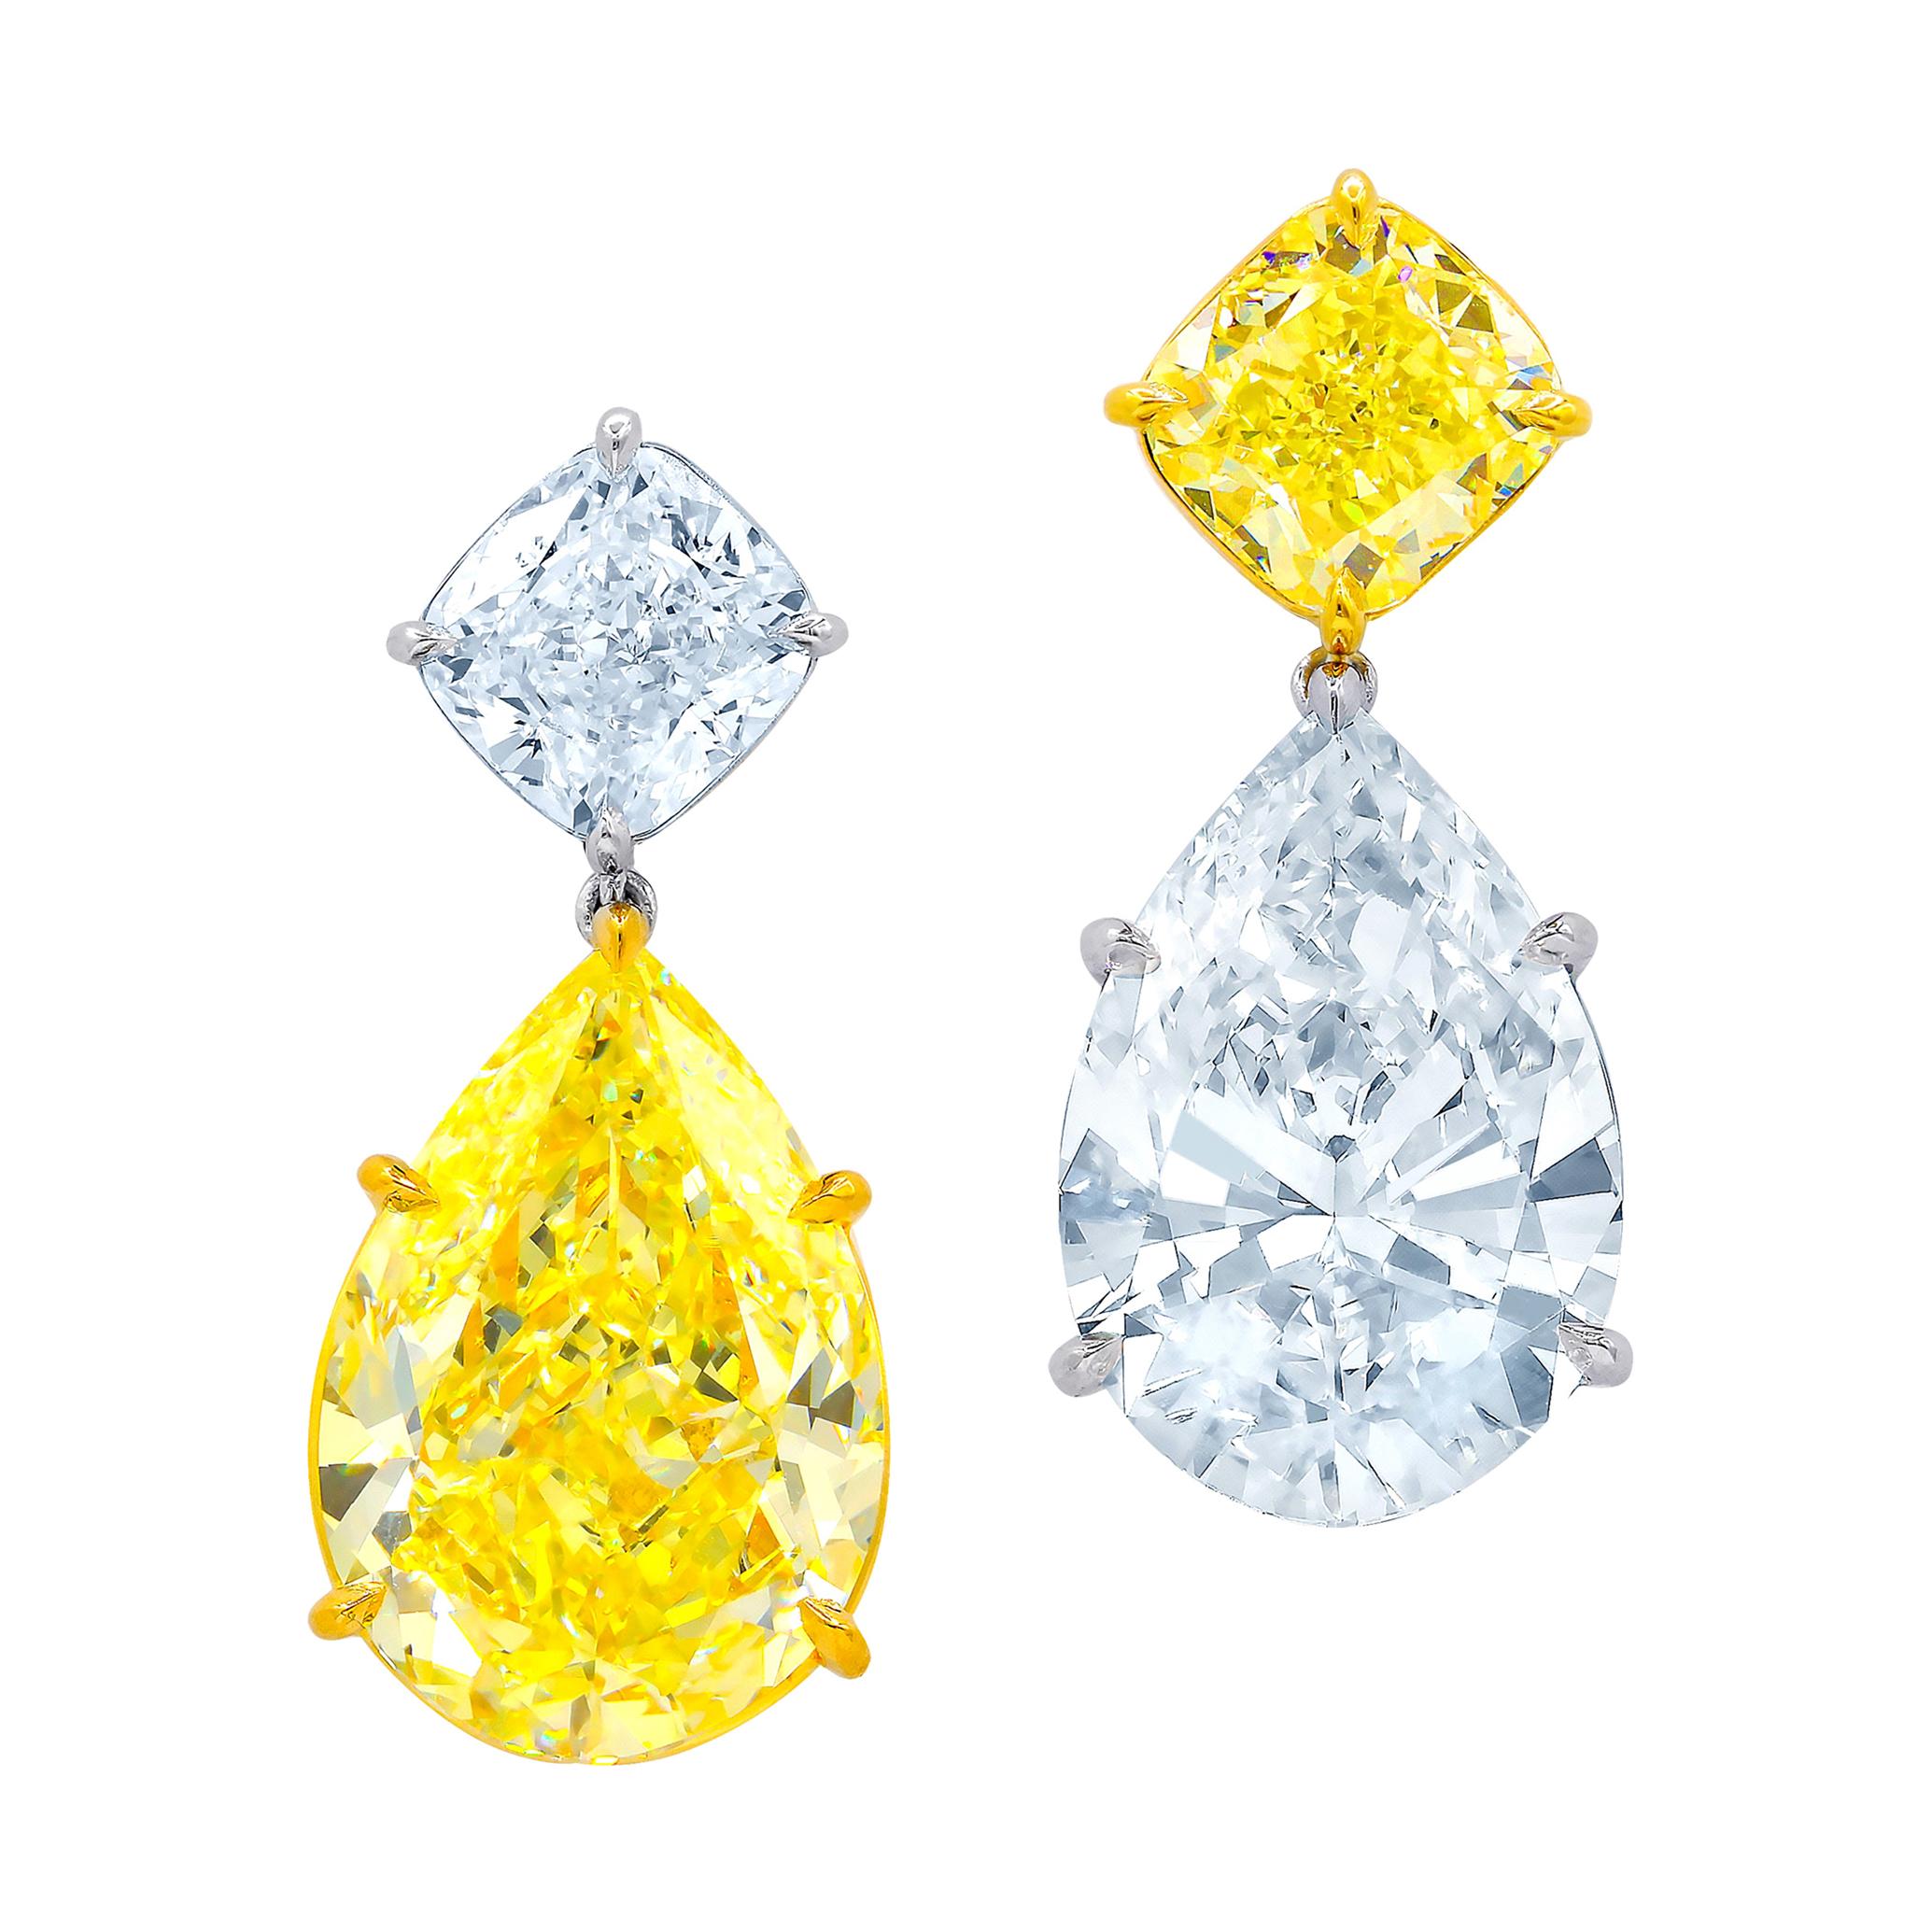 Magnificent 18kt and Platinum Pear Shape Diamond Earrings For Sale